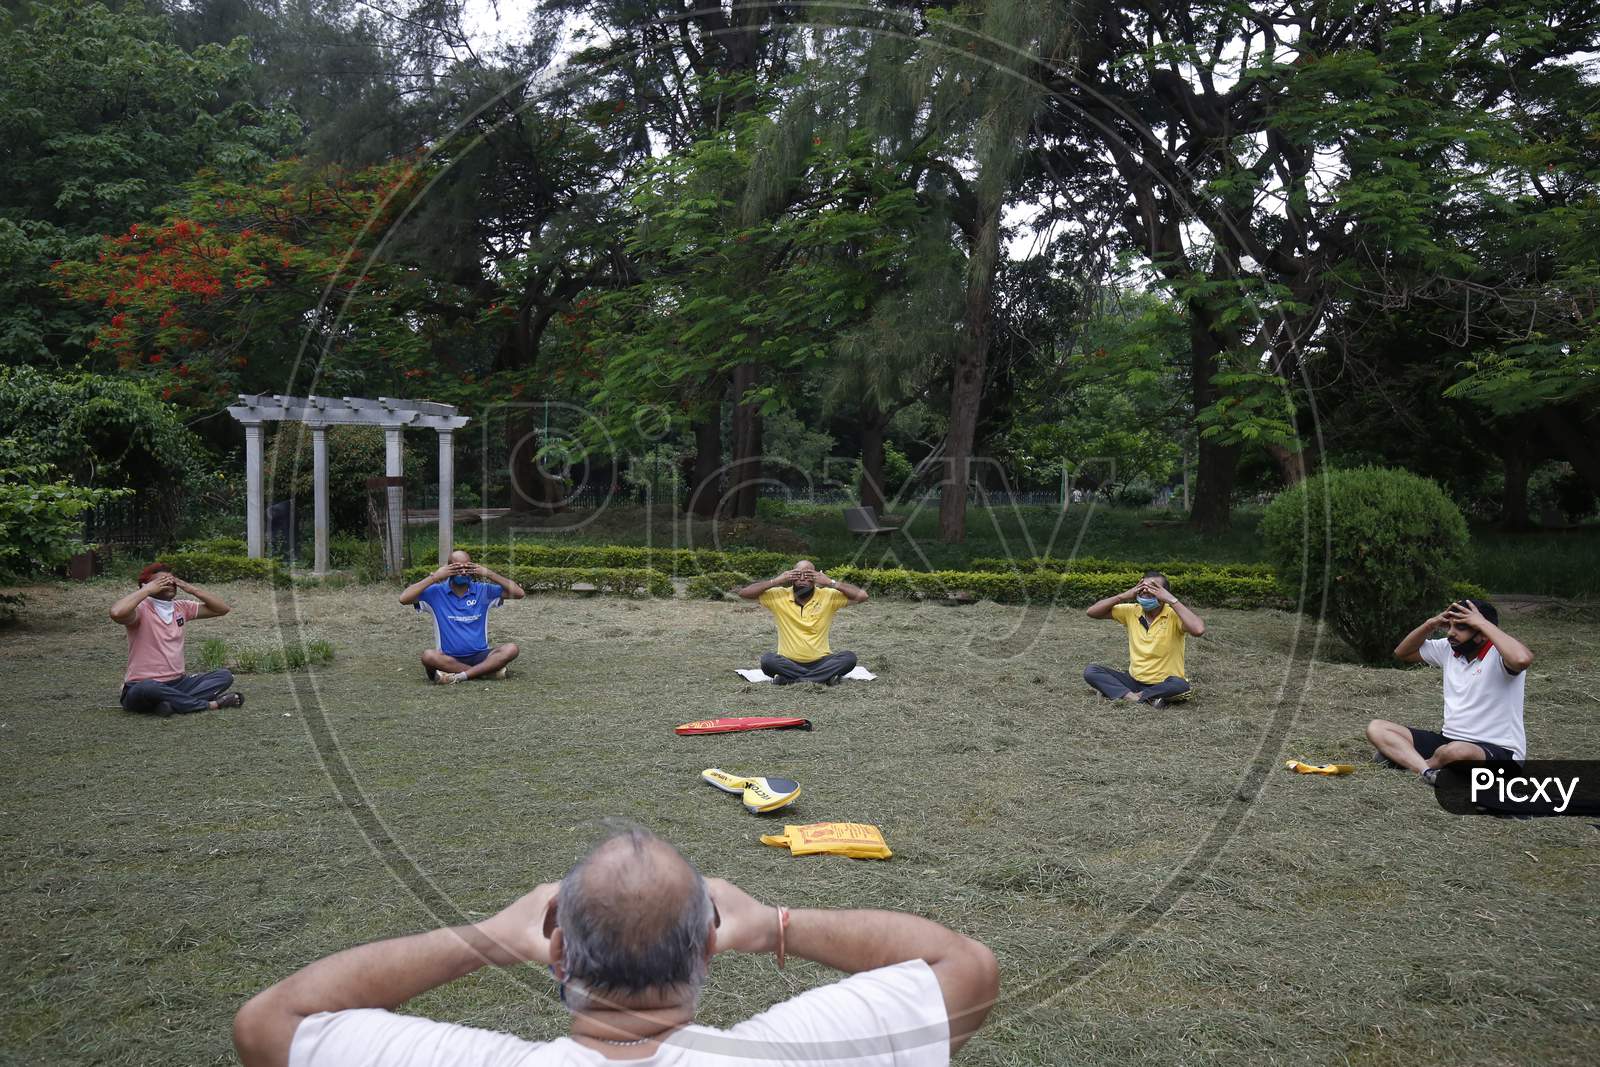 Men perform yoga in Cubbon Park after the state eased lockdown norms during the nationwide lockdown to prevent the spread of coronavirus (COVID-19) in Bangalore, India.